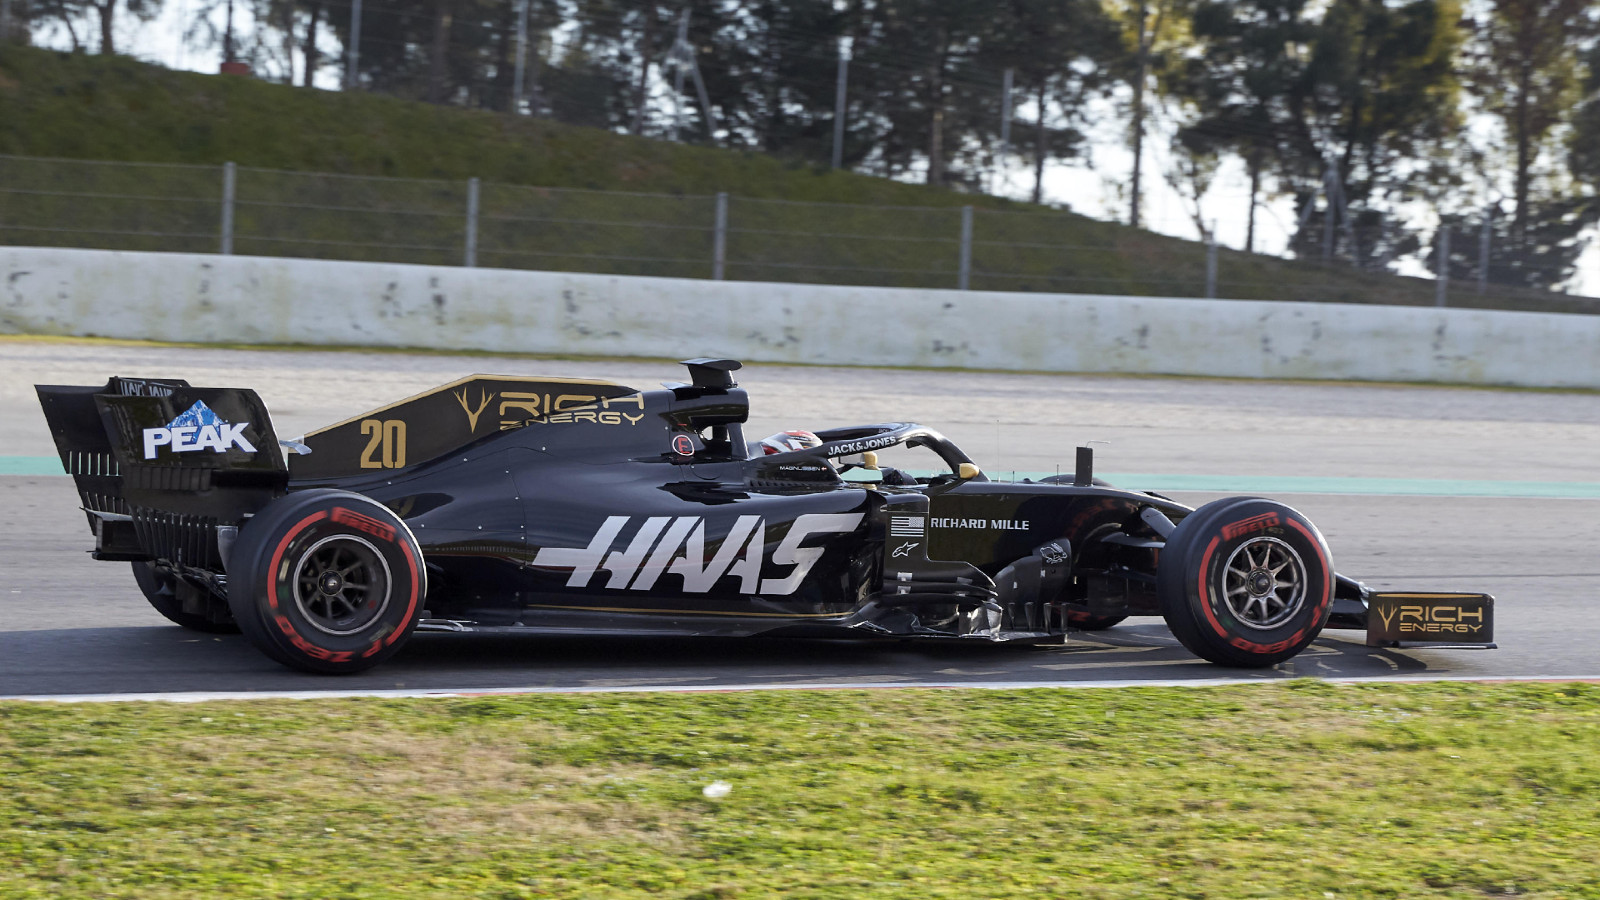 Kevin Magnussen driving the Rich Energy Haas VF-19 in pre-season testing in Barcelona.